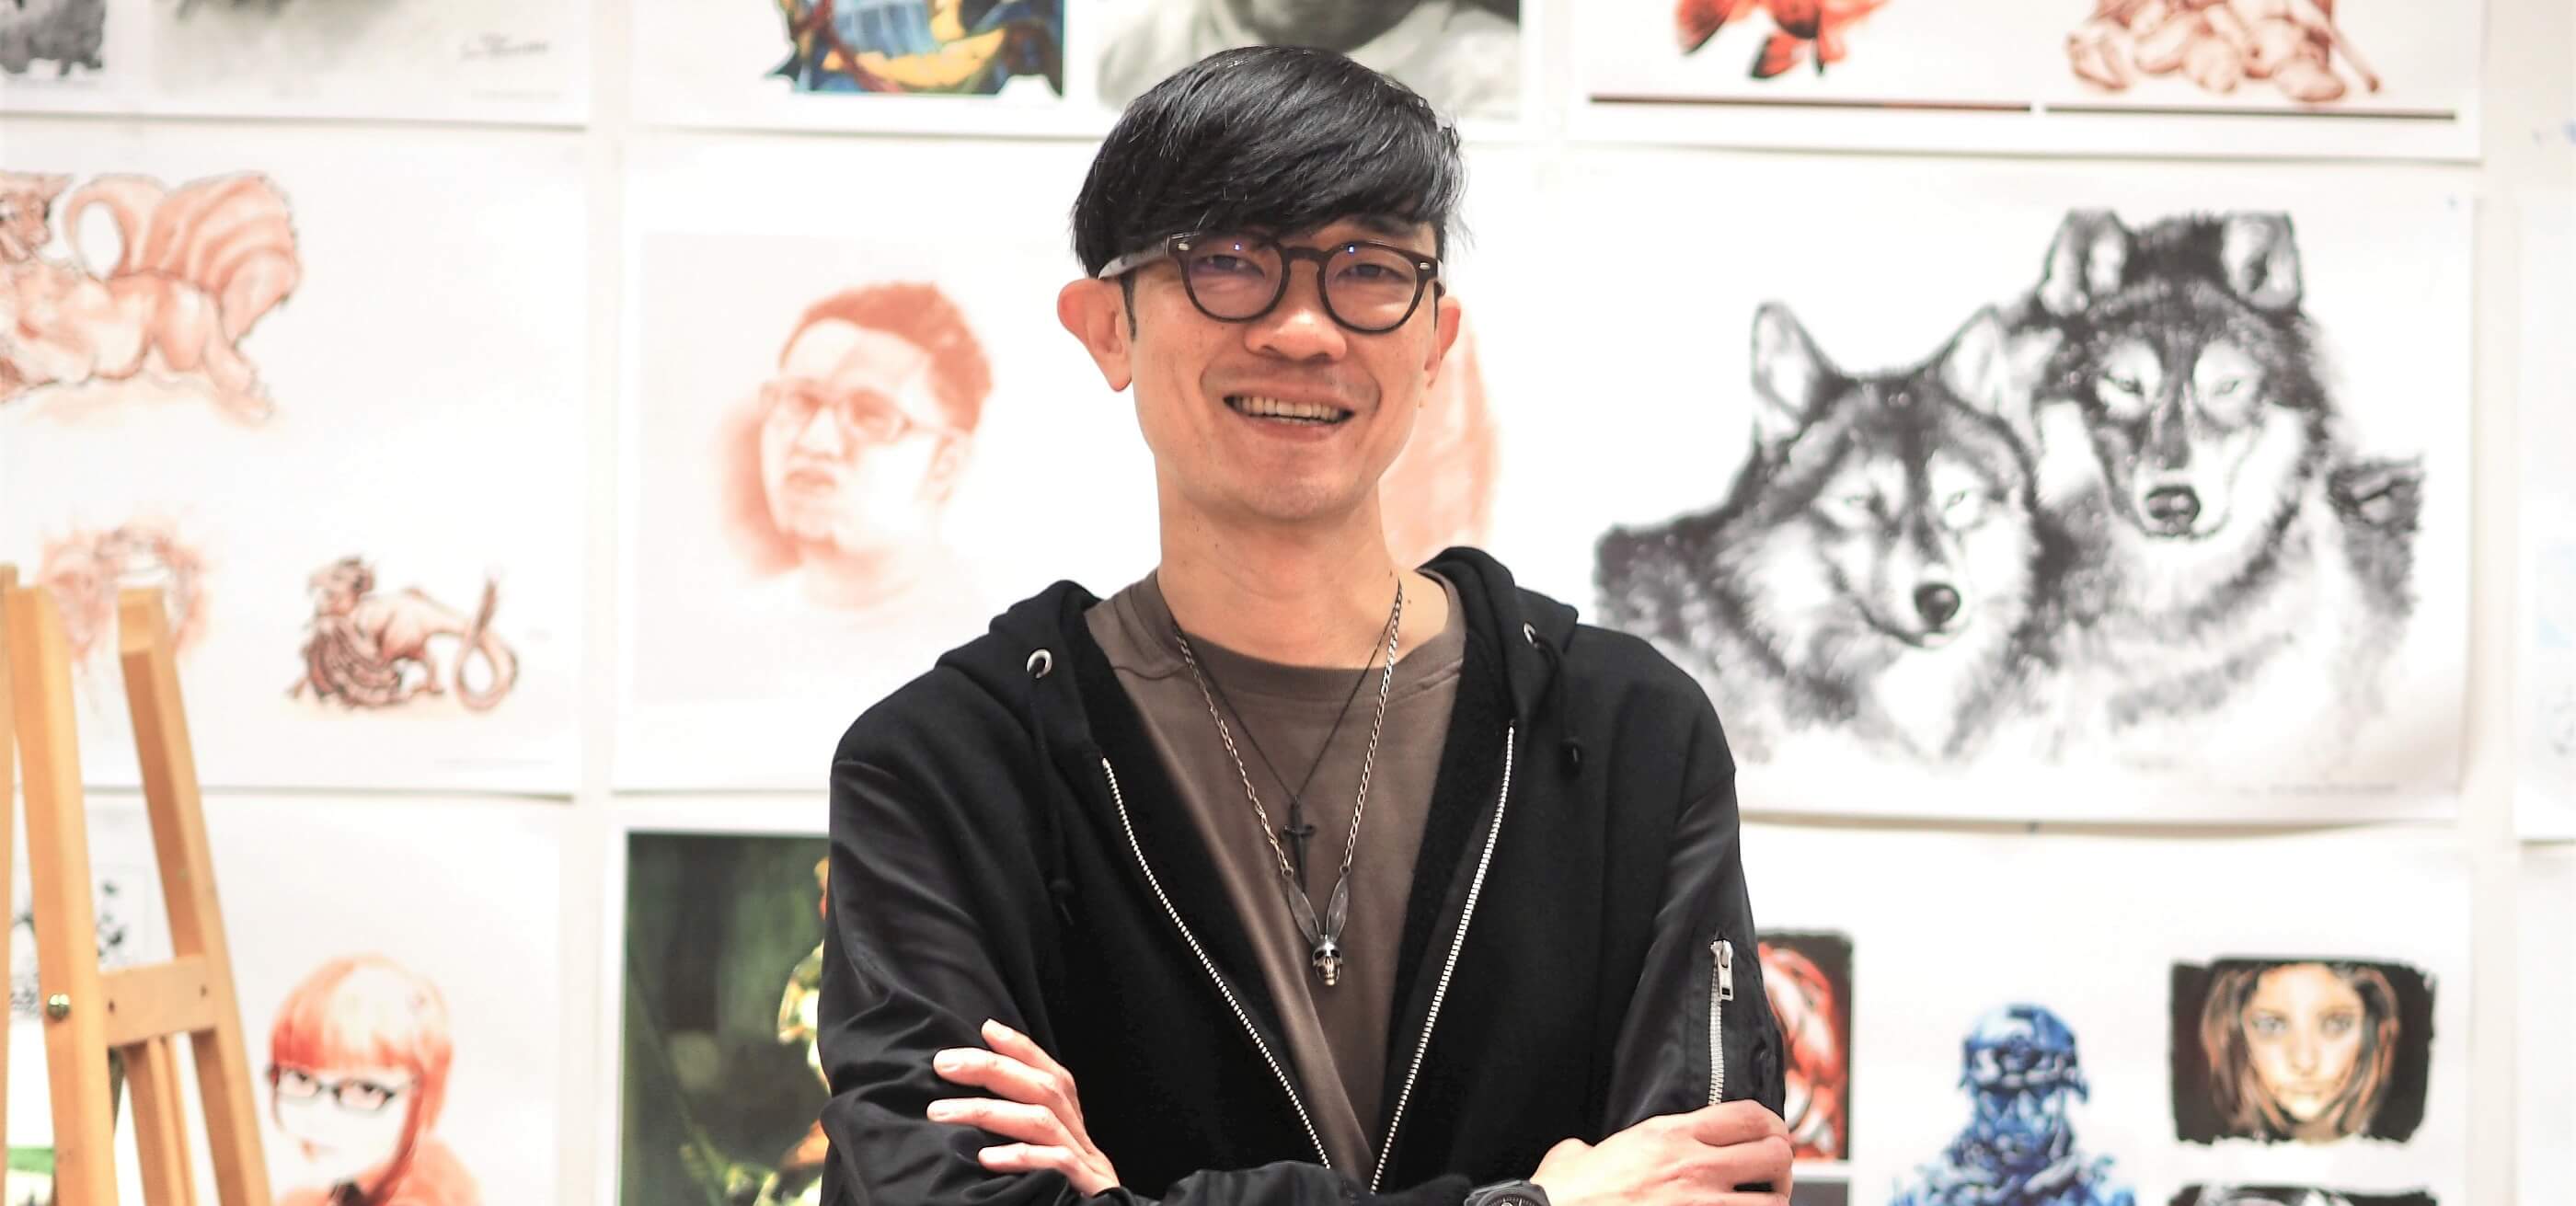 DigiPen Department Chair Dominic Chang stands in front of a wall full of student art work